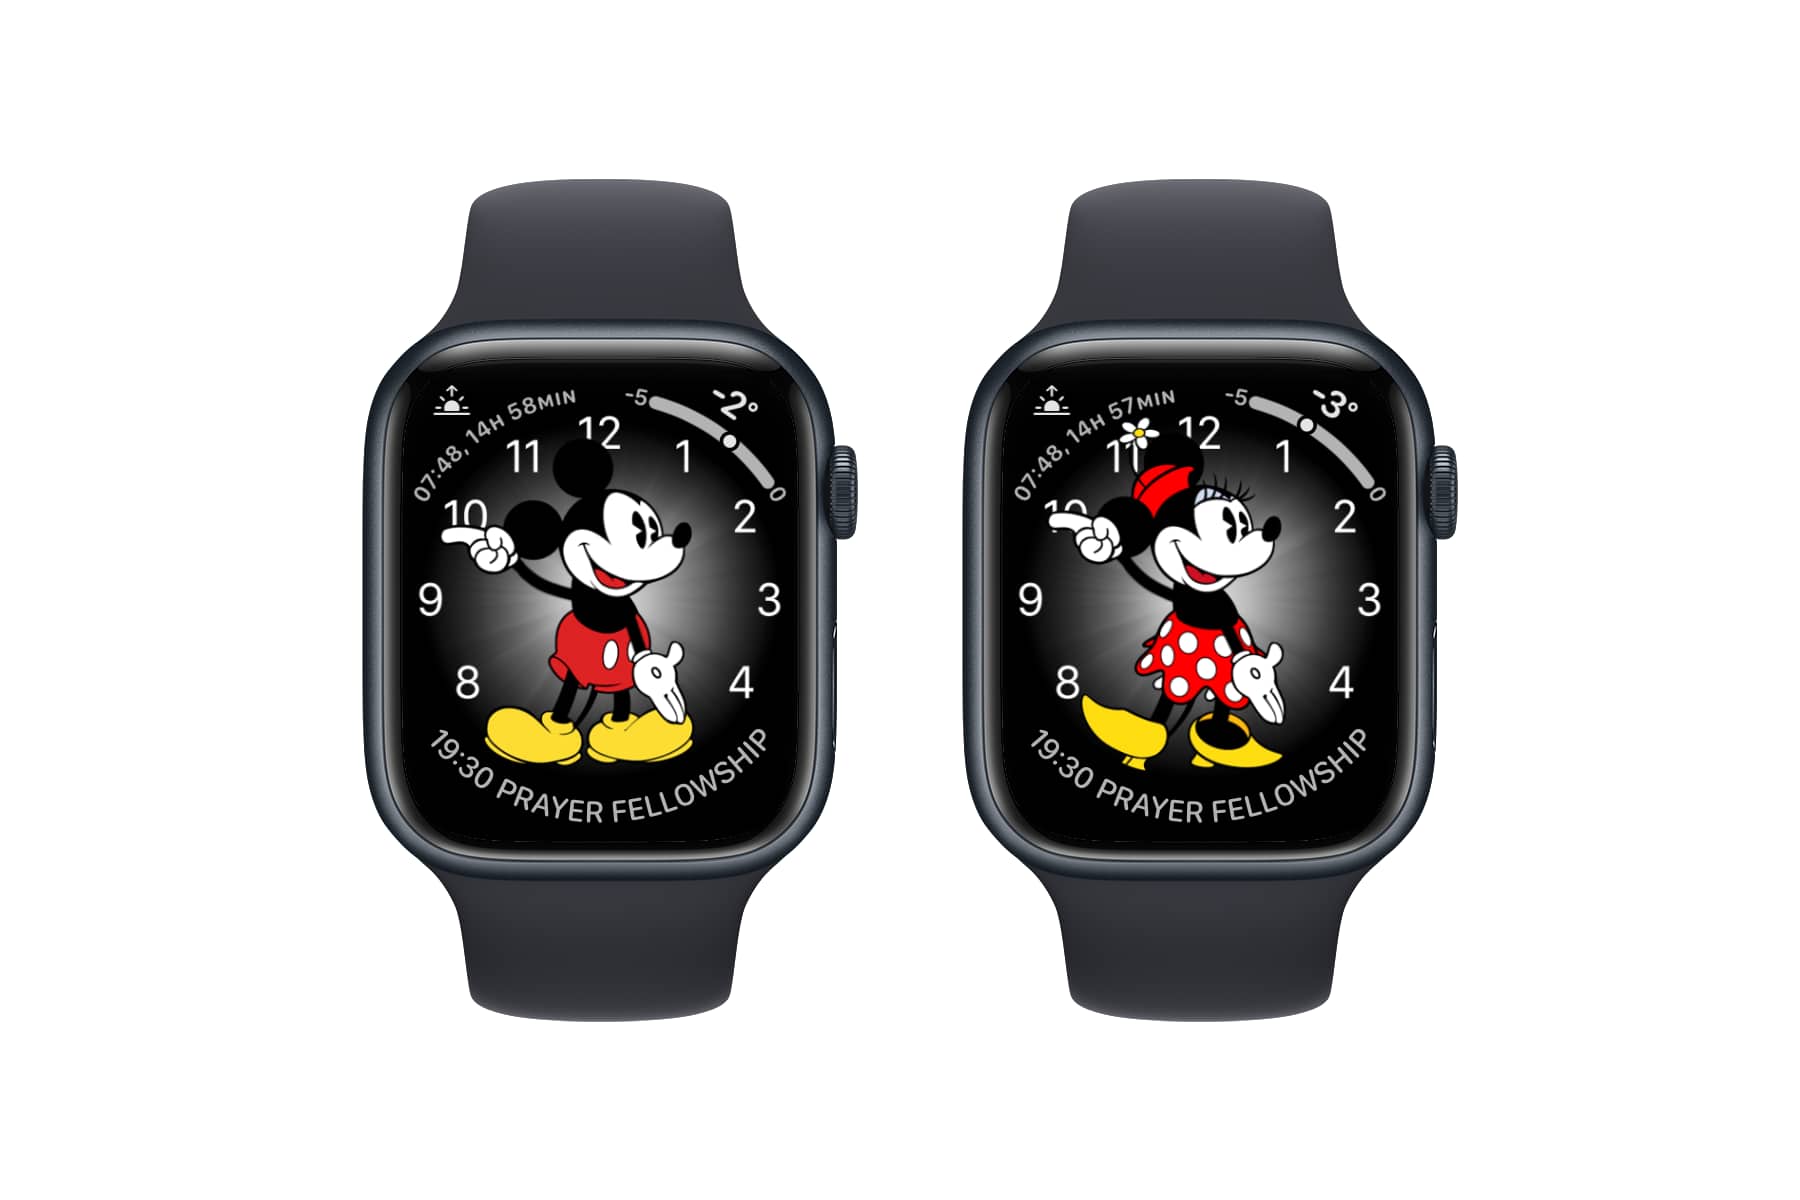 Three Apple Watches showing Mickey Mouse and Minnie Mouse watch faces.